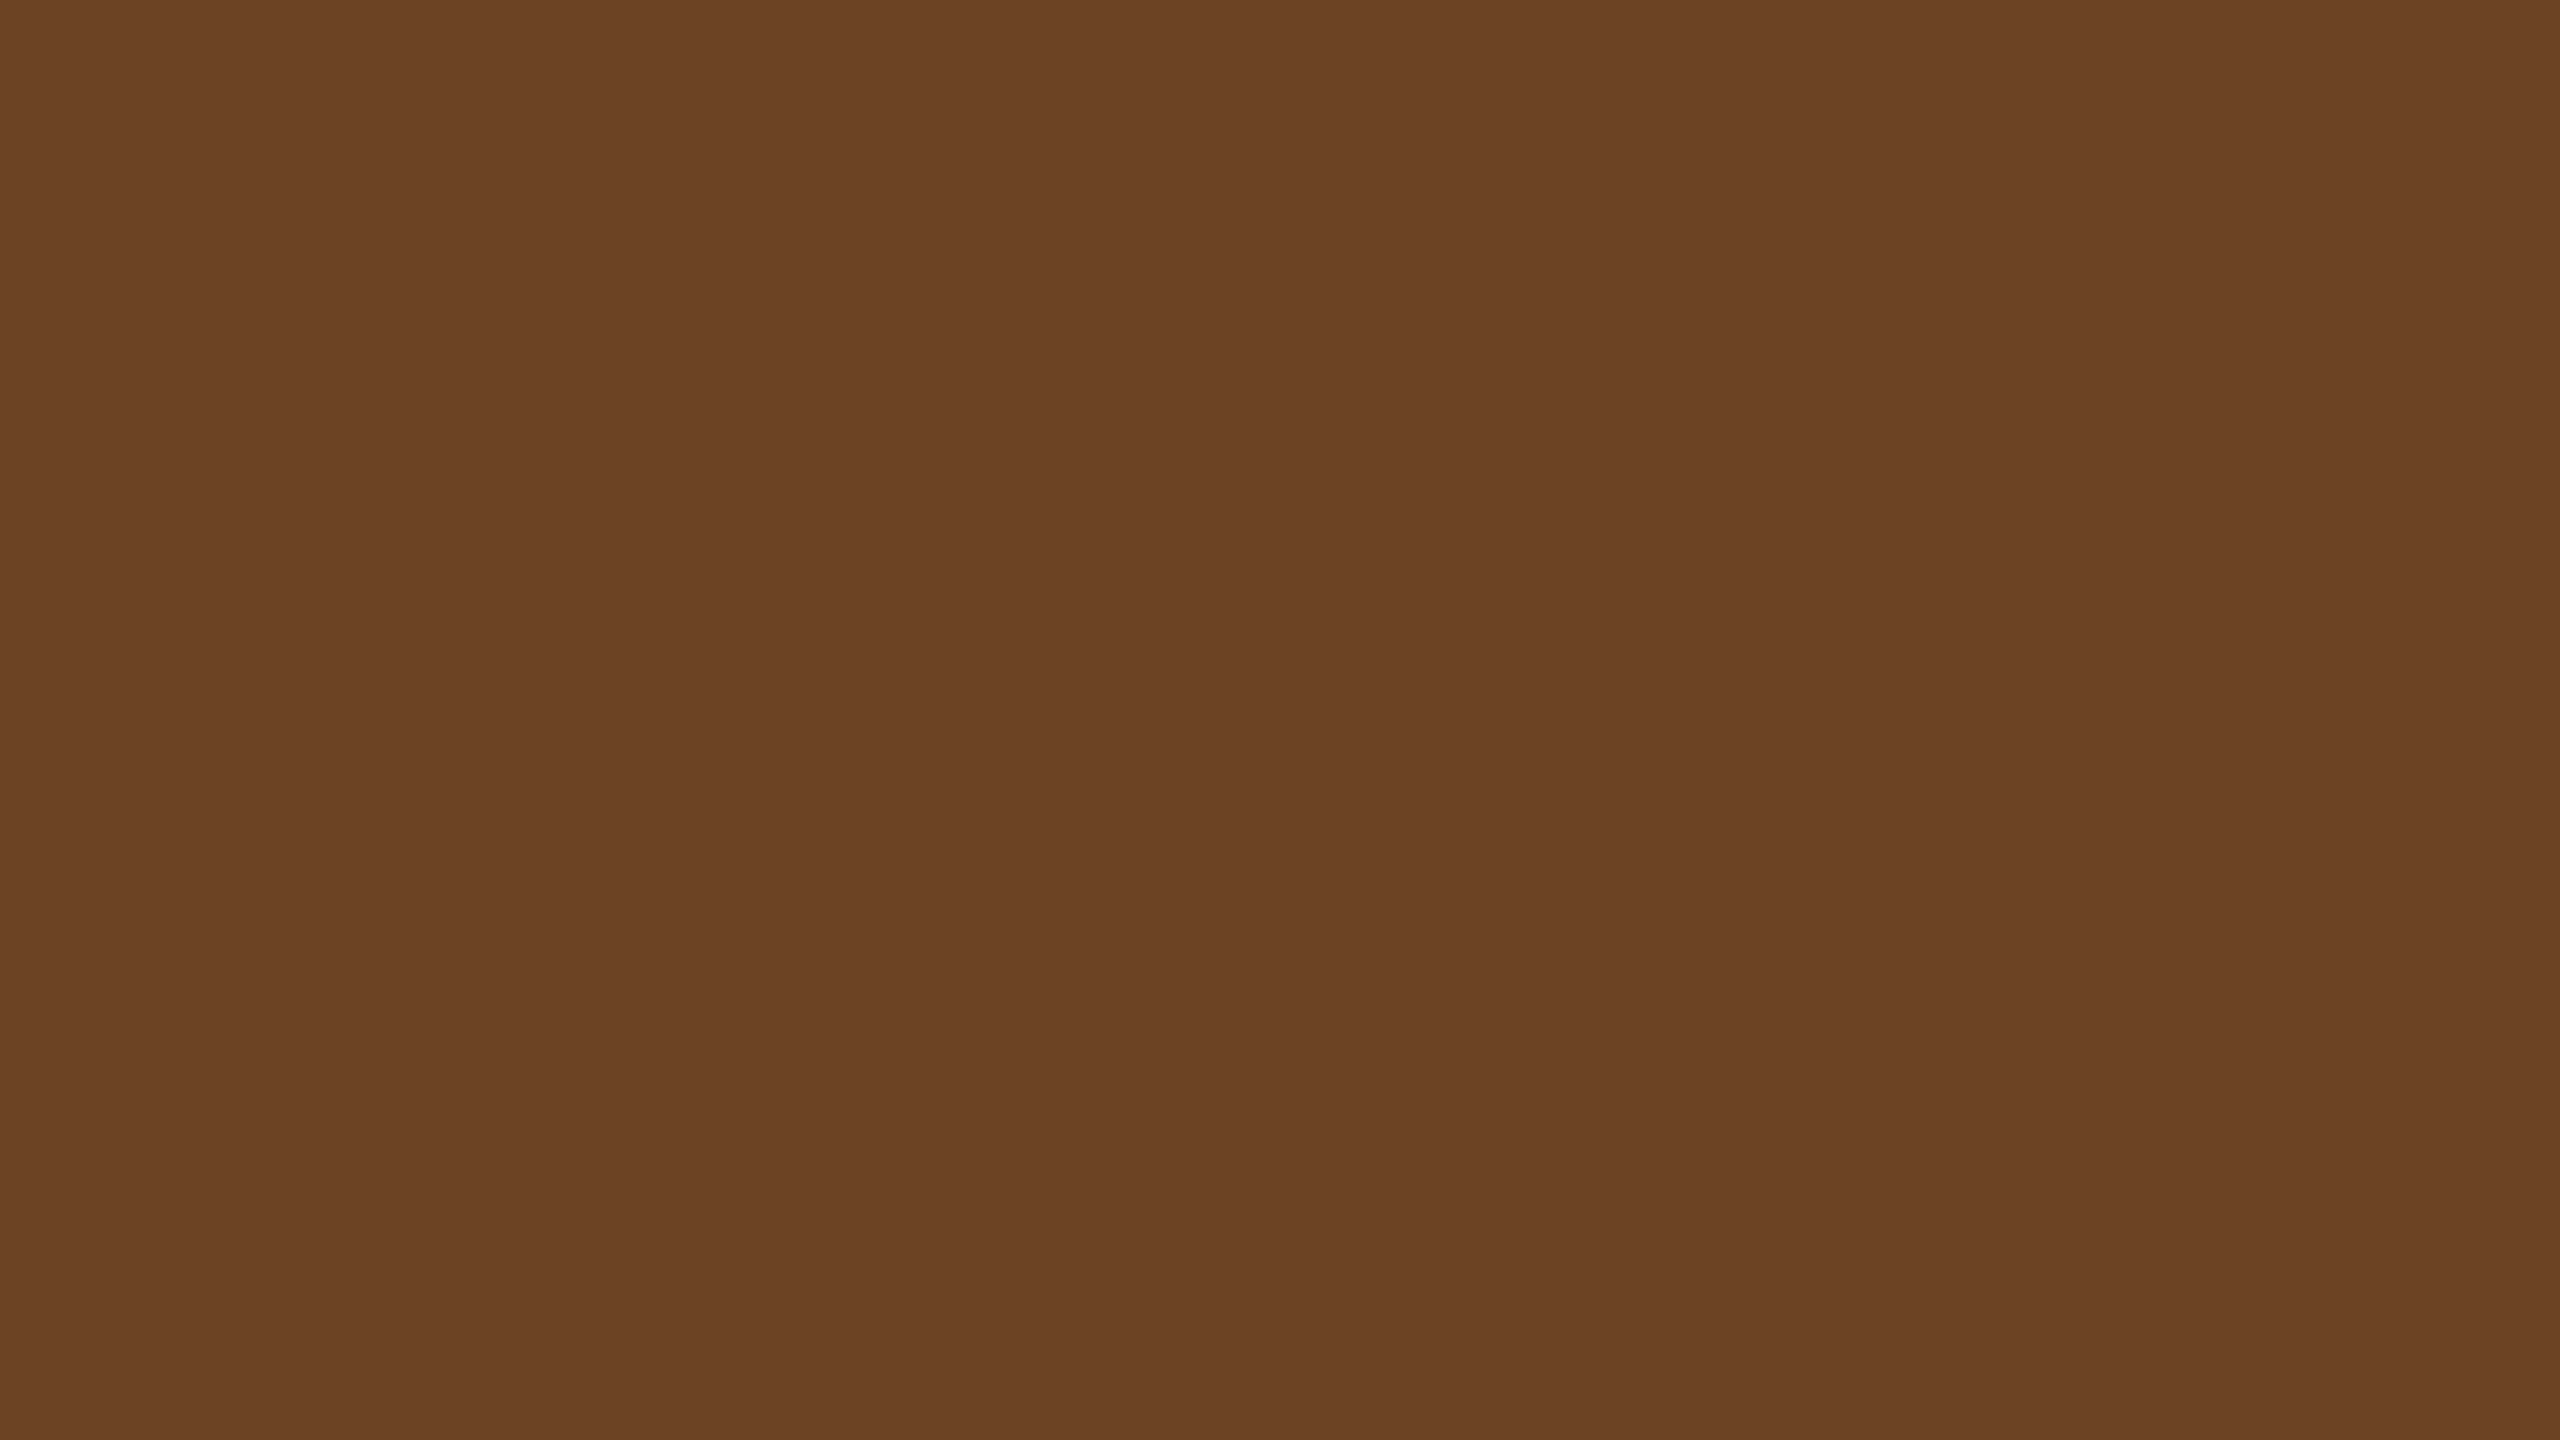 2560x1440 Brown-nose Solid Color Background